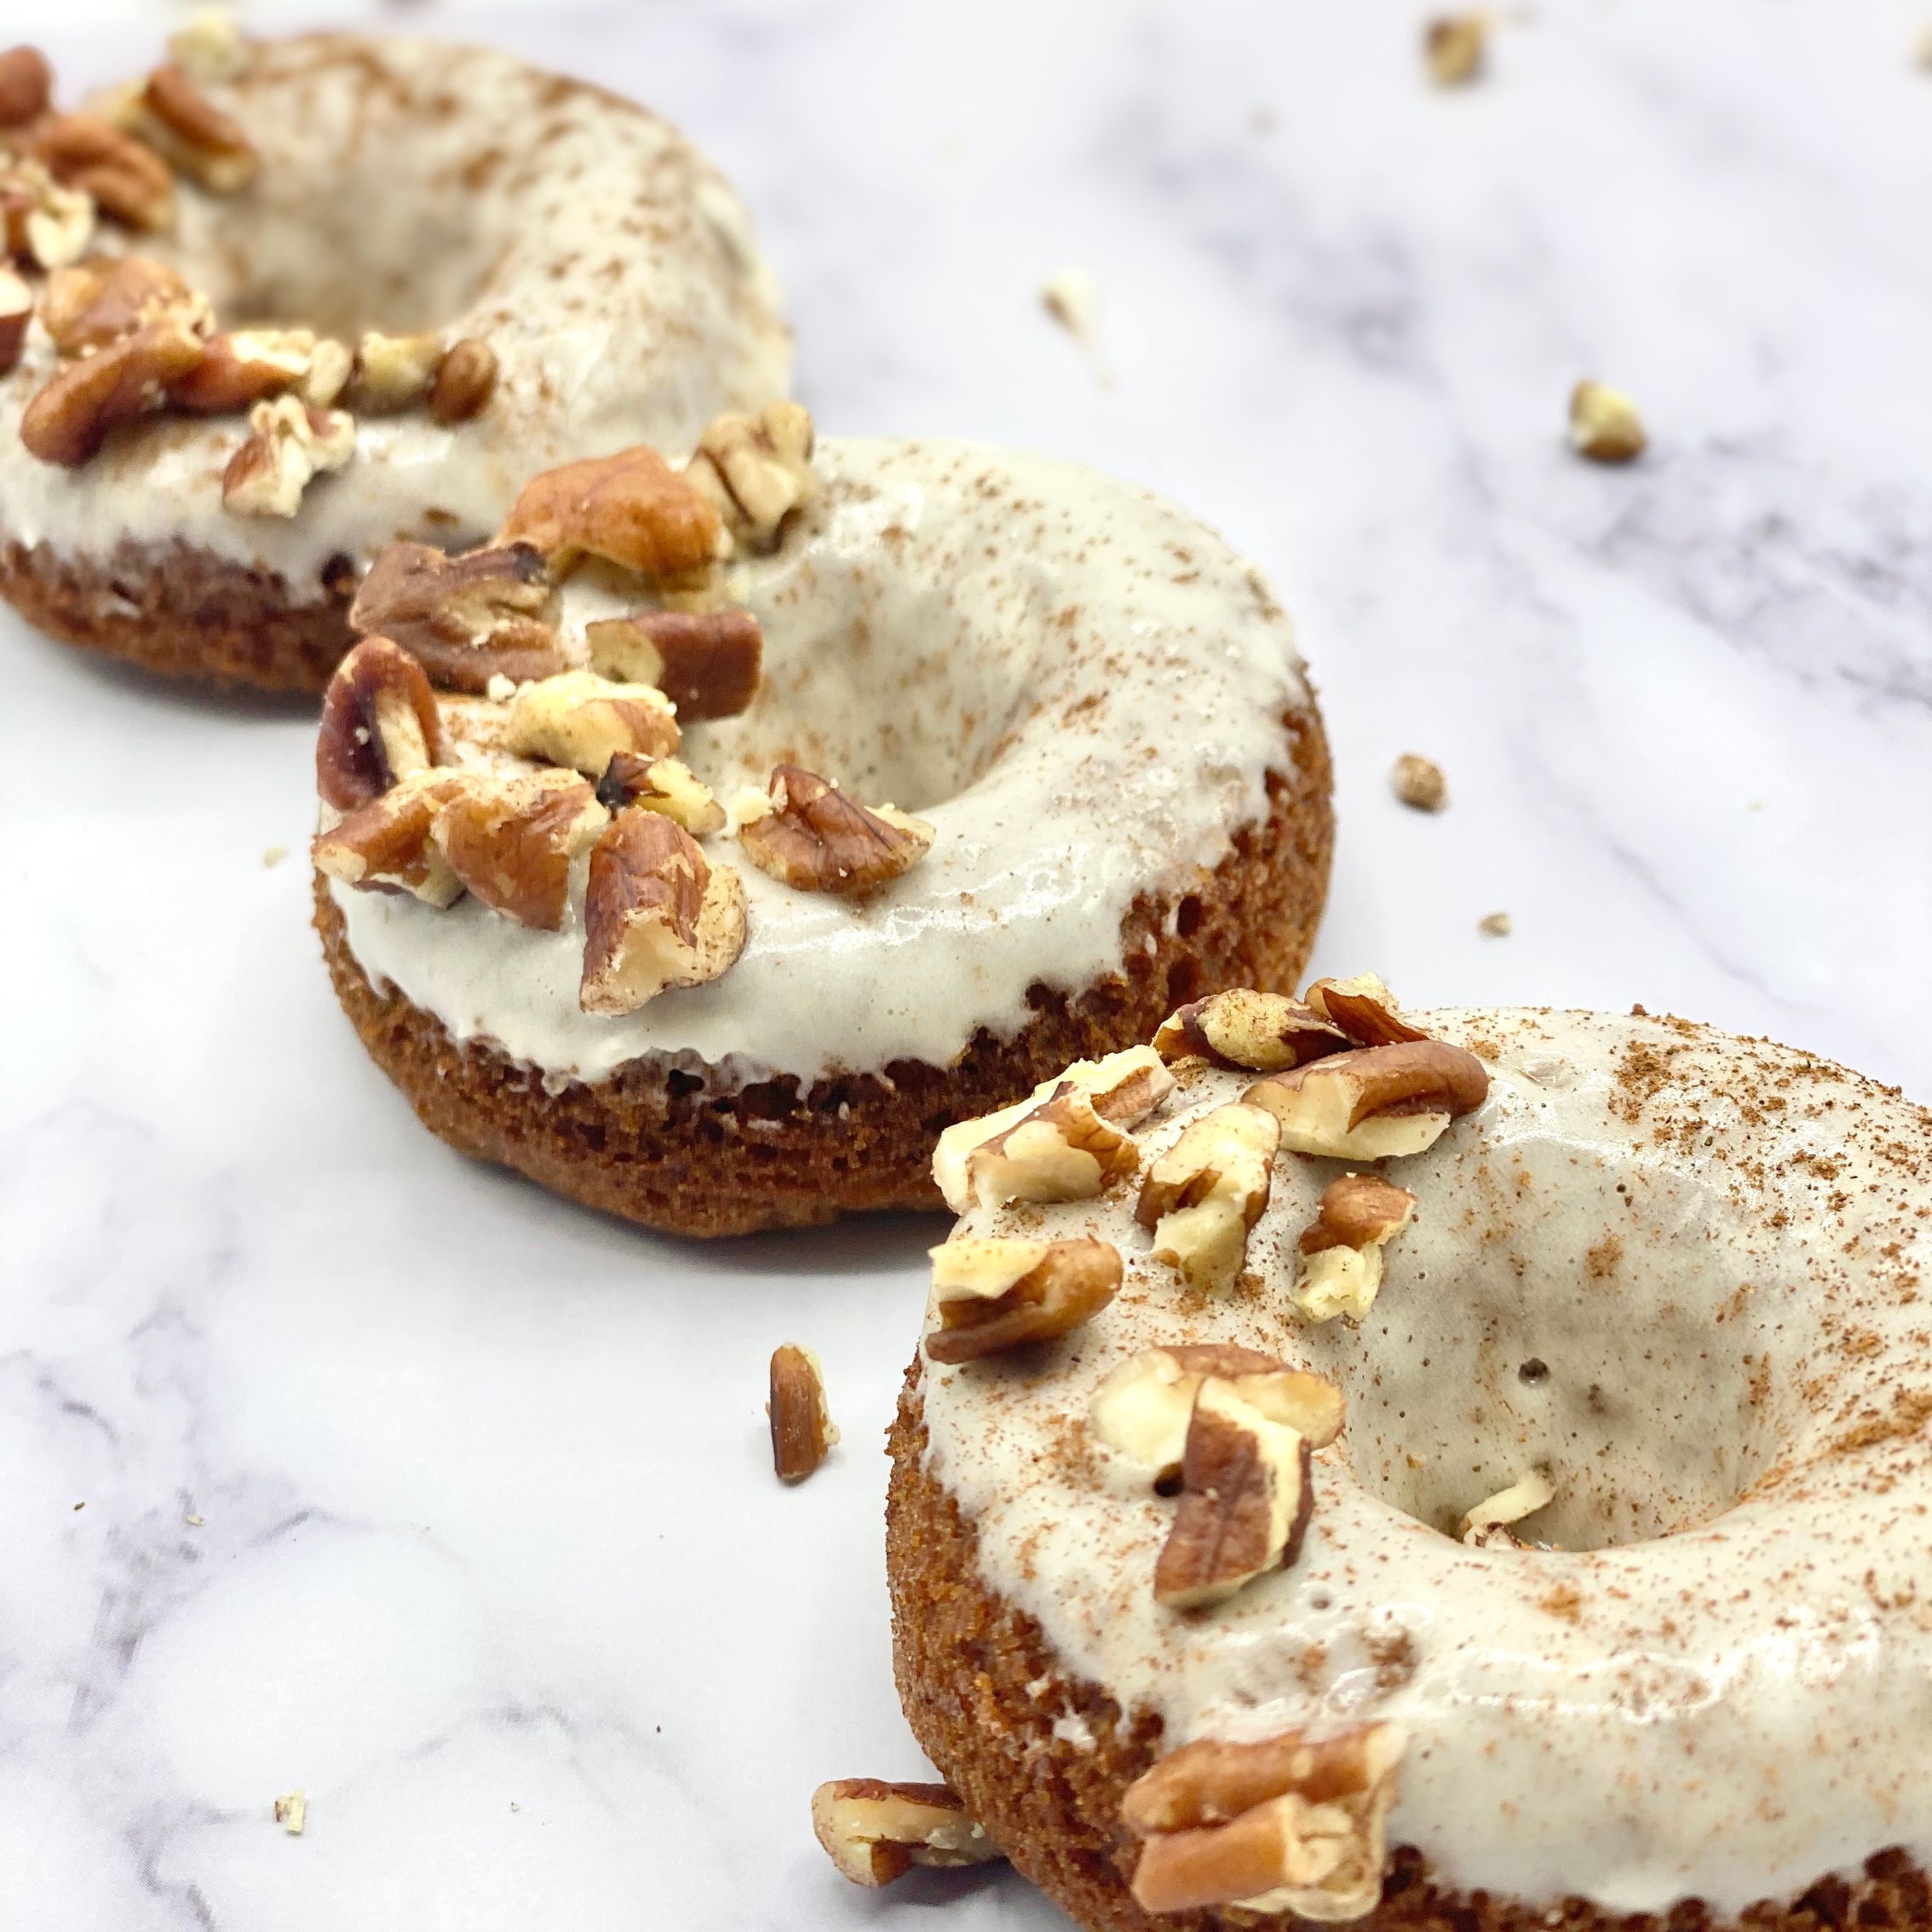 Carrot Cake Doughnuts With Icing, Cinnamon Powder and Nuts